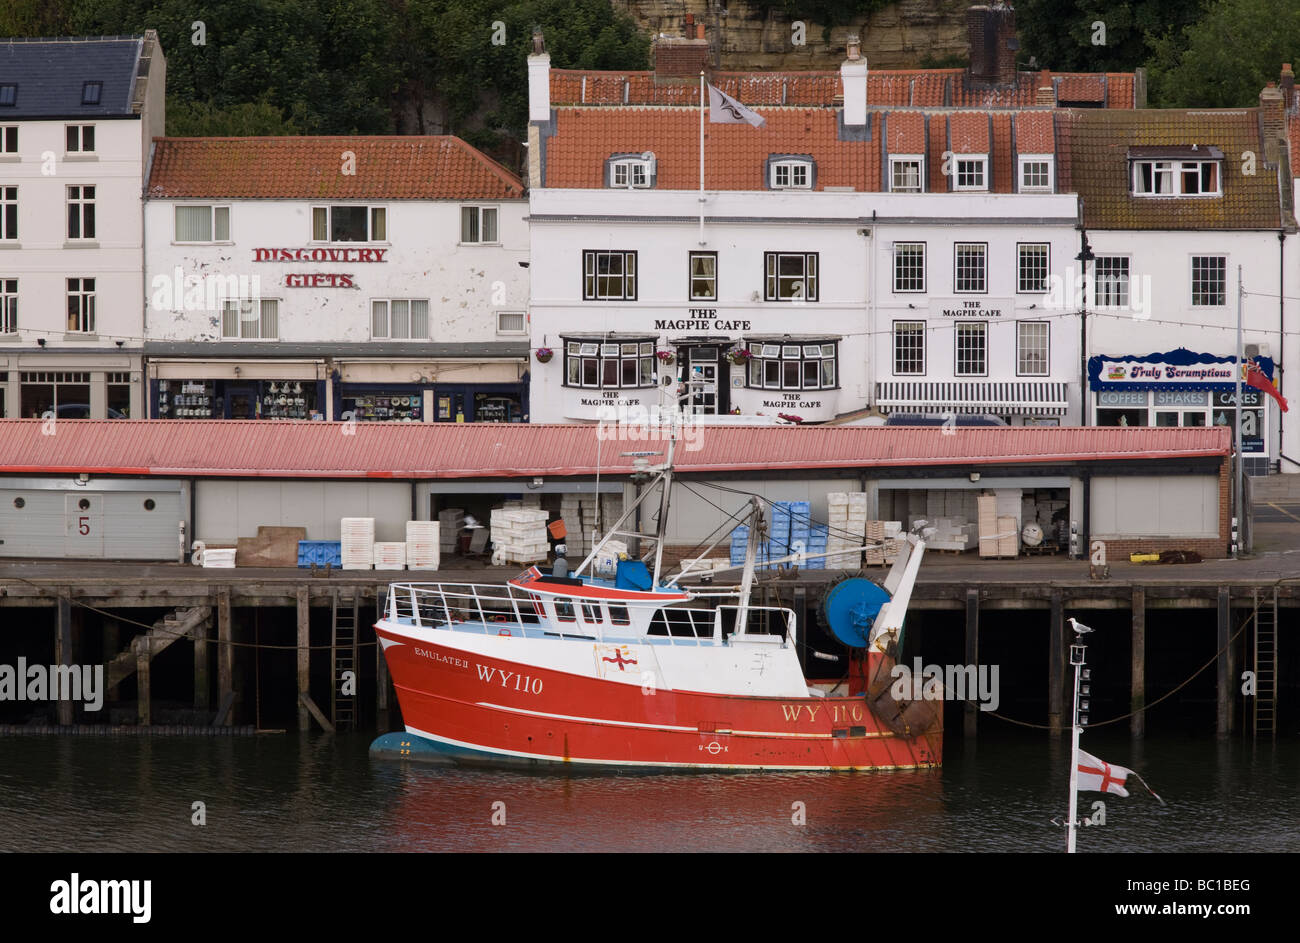 A fishing trawler moored in front of the fish quay and the Magpie Cafe, famous fish and chip restaurant - Whitby Stock Photo